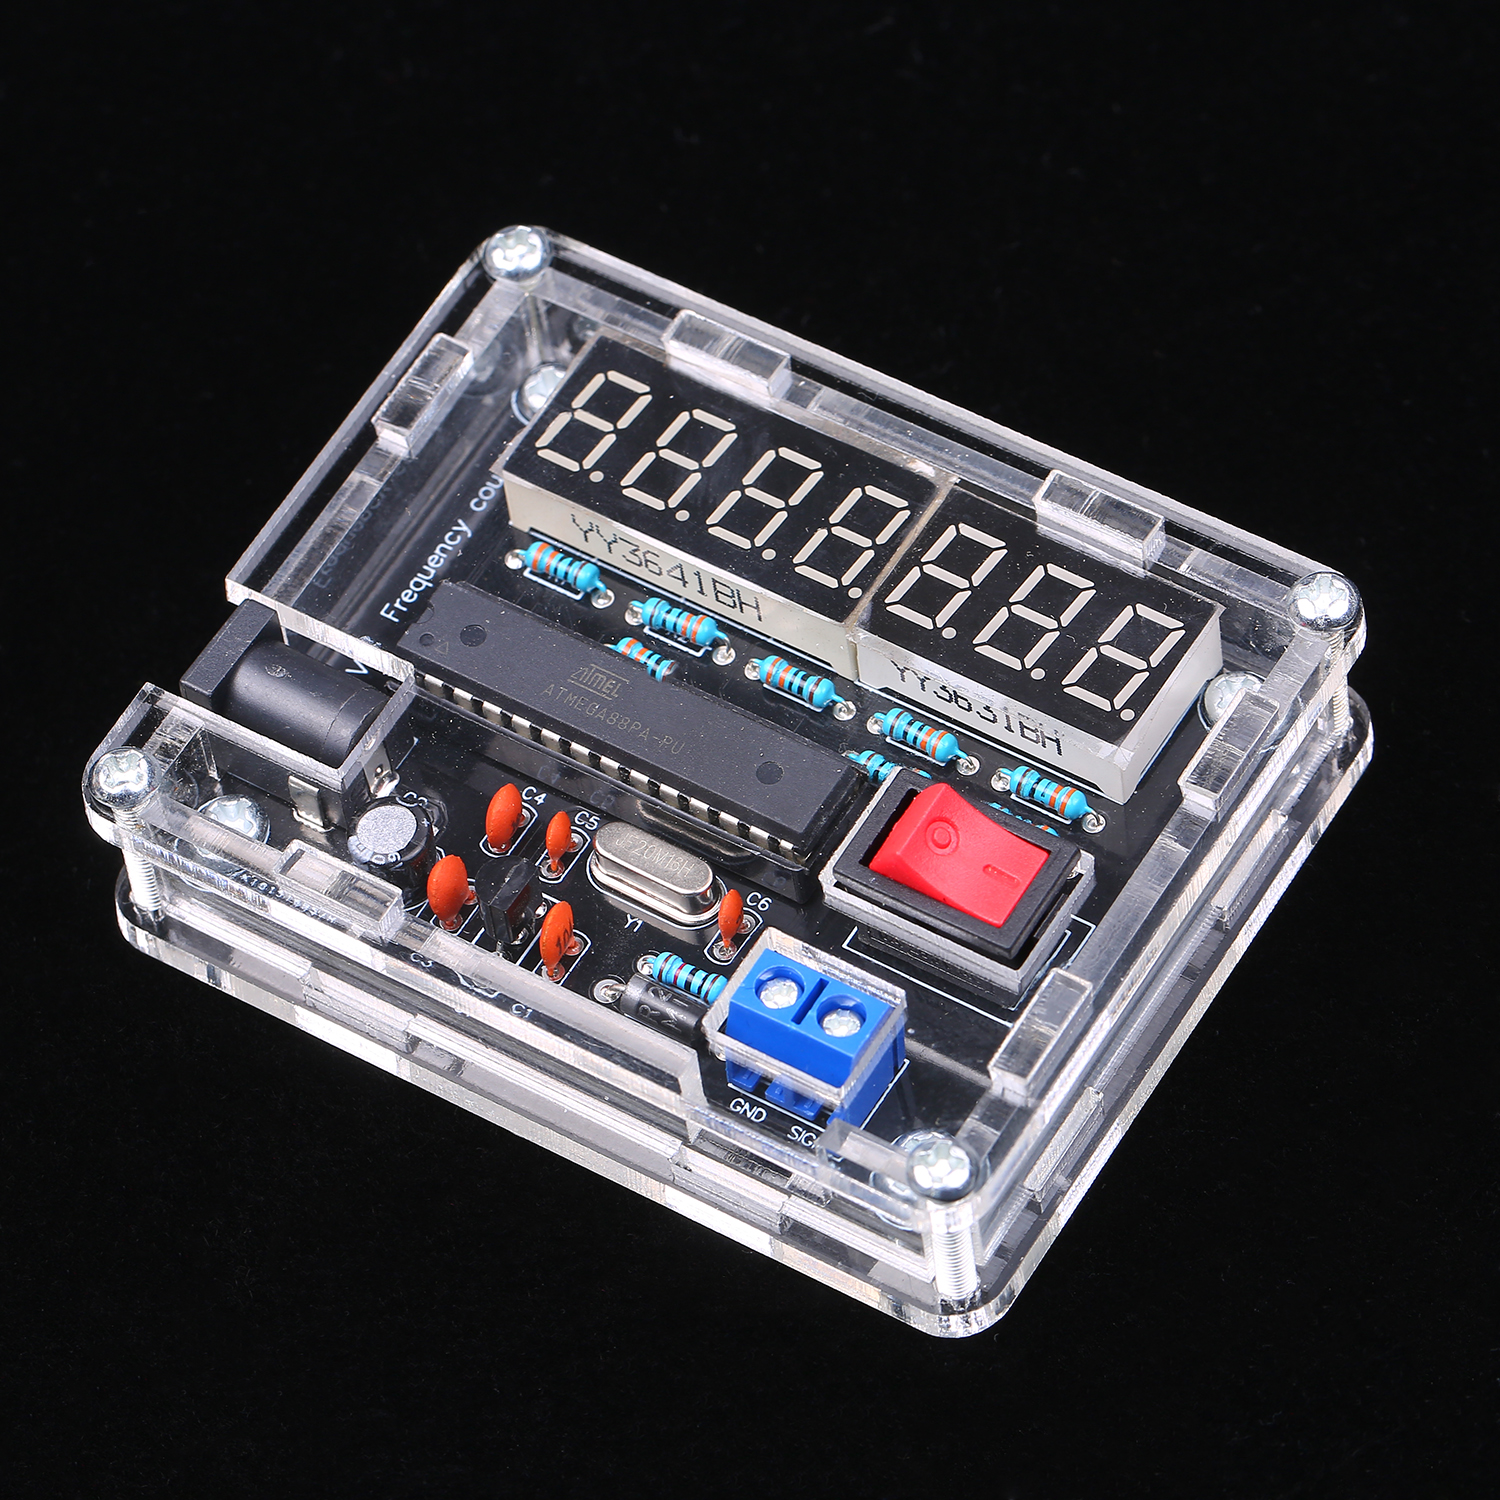 Frequency Meter Crystal Measurement Frequency For Measure Oscillator DIY Kit Module Board 7-bit Precision Resolution